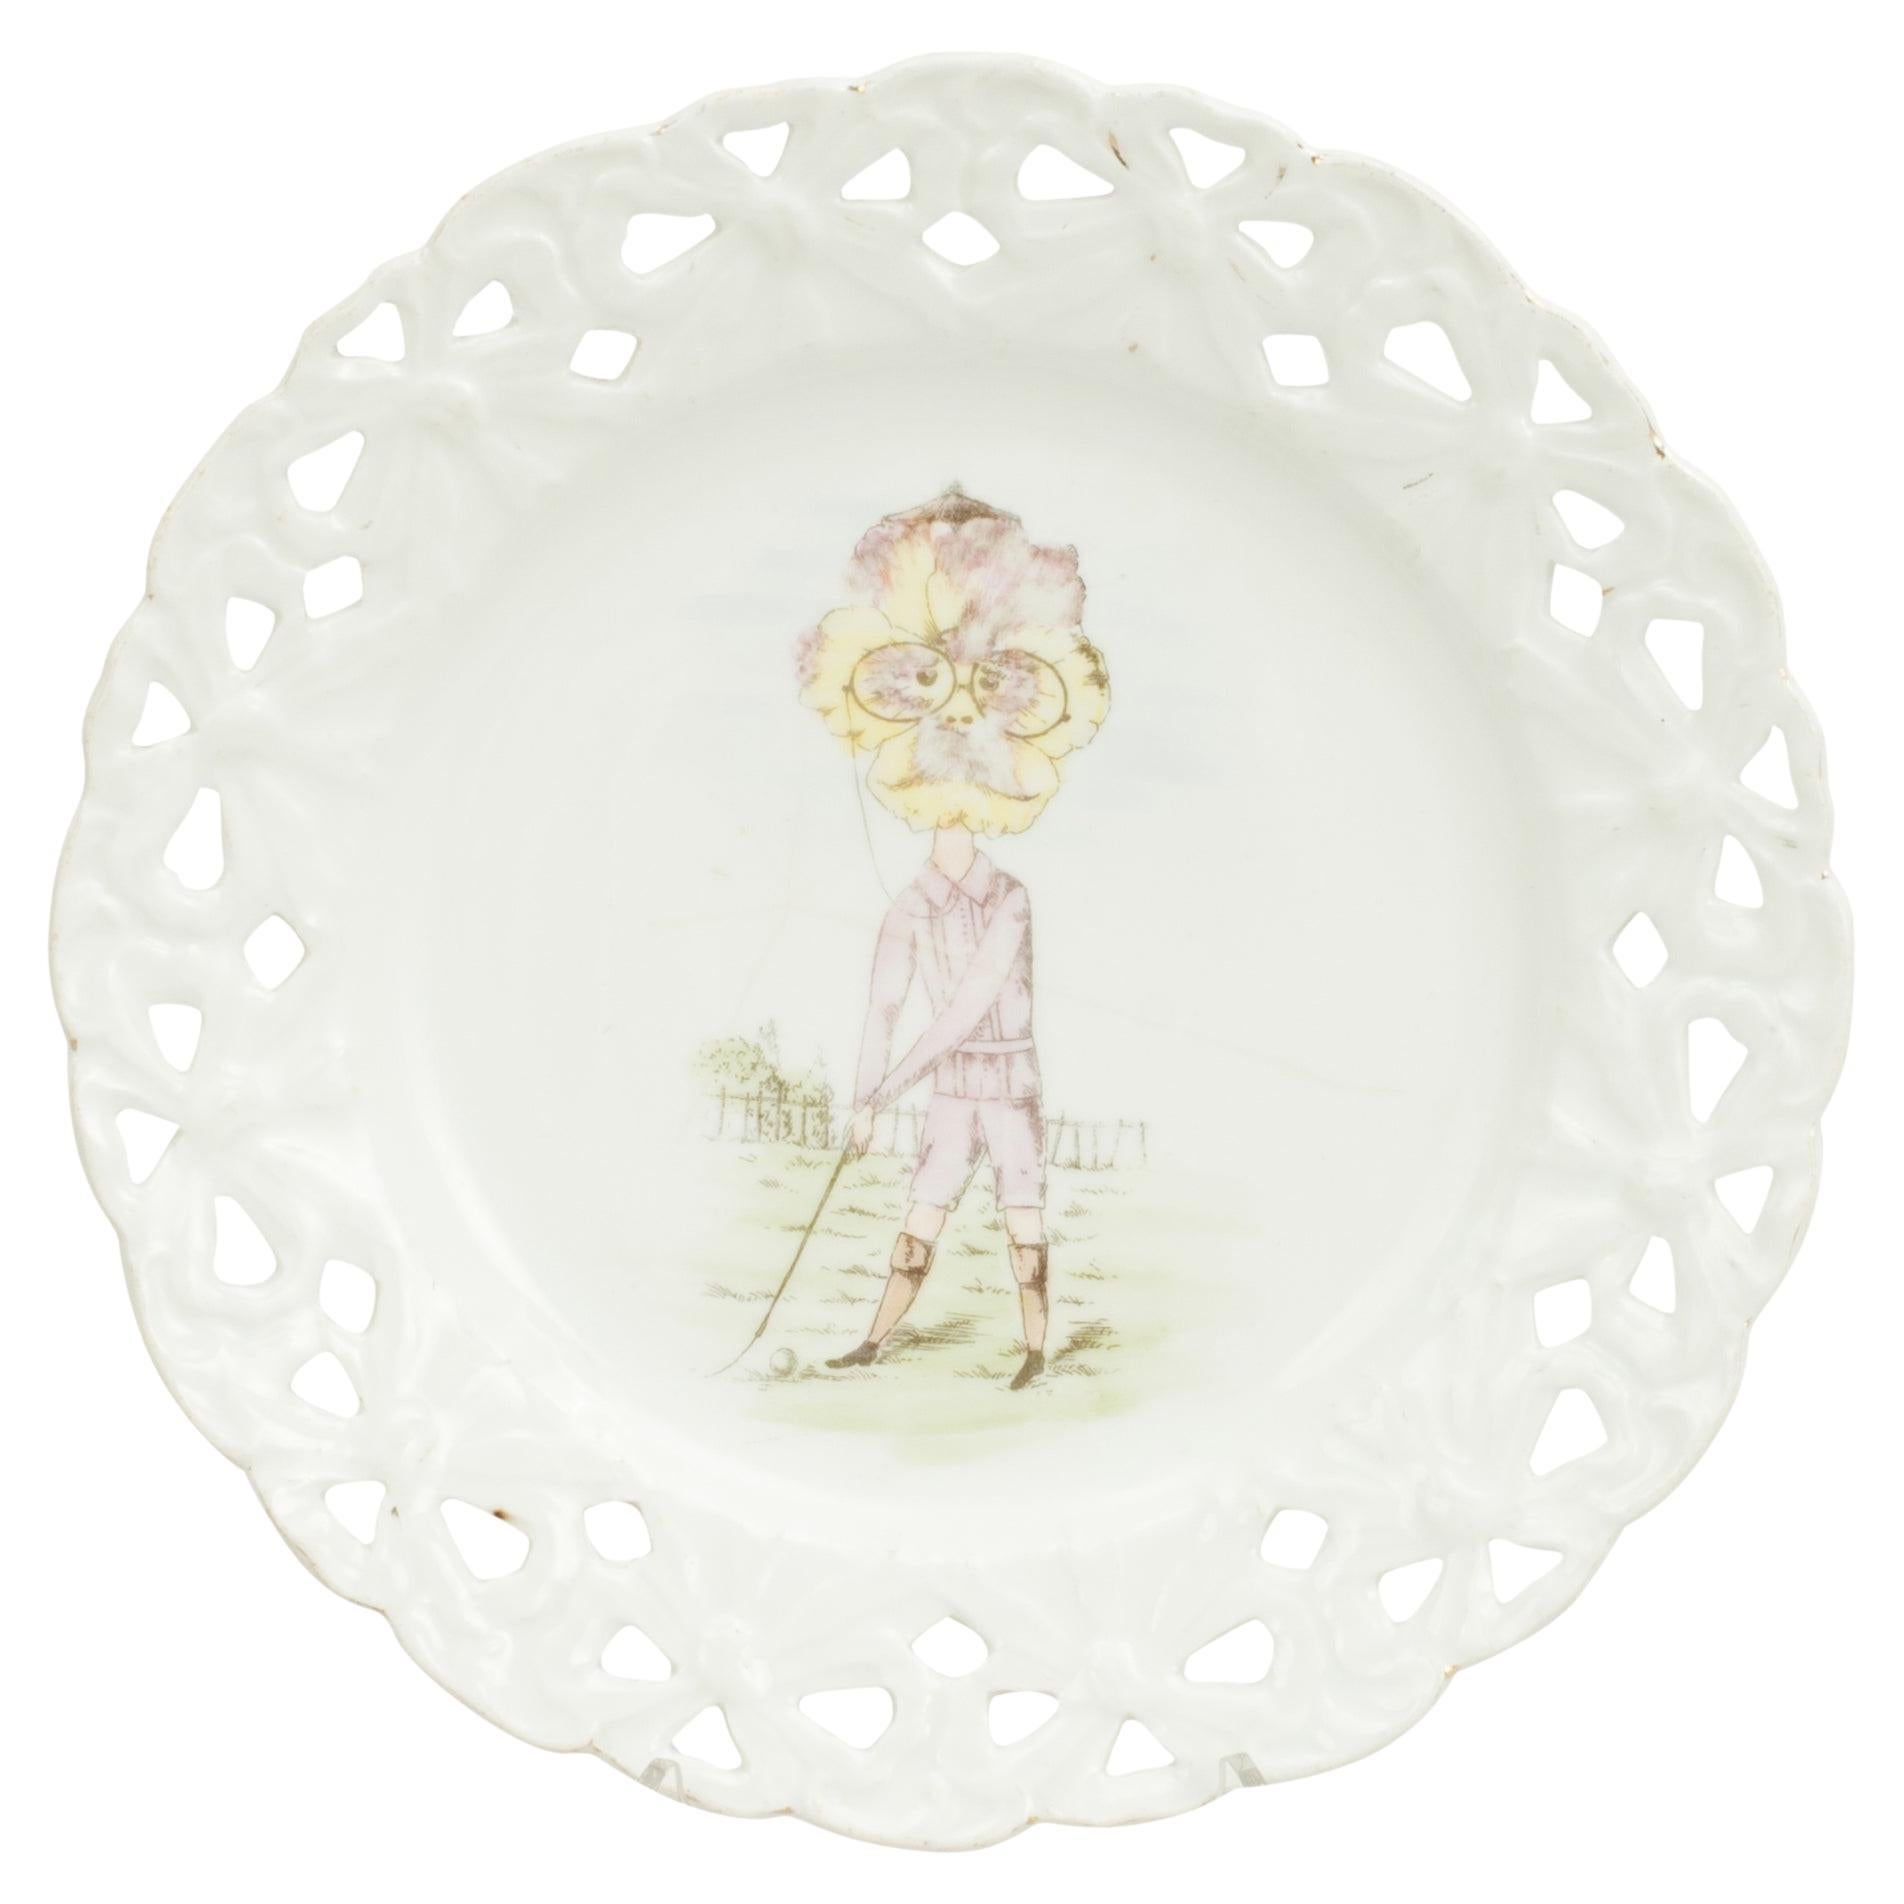 Unusual Ceramic Golf Plate With Flower For Sale